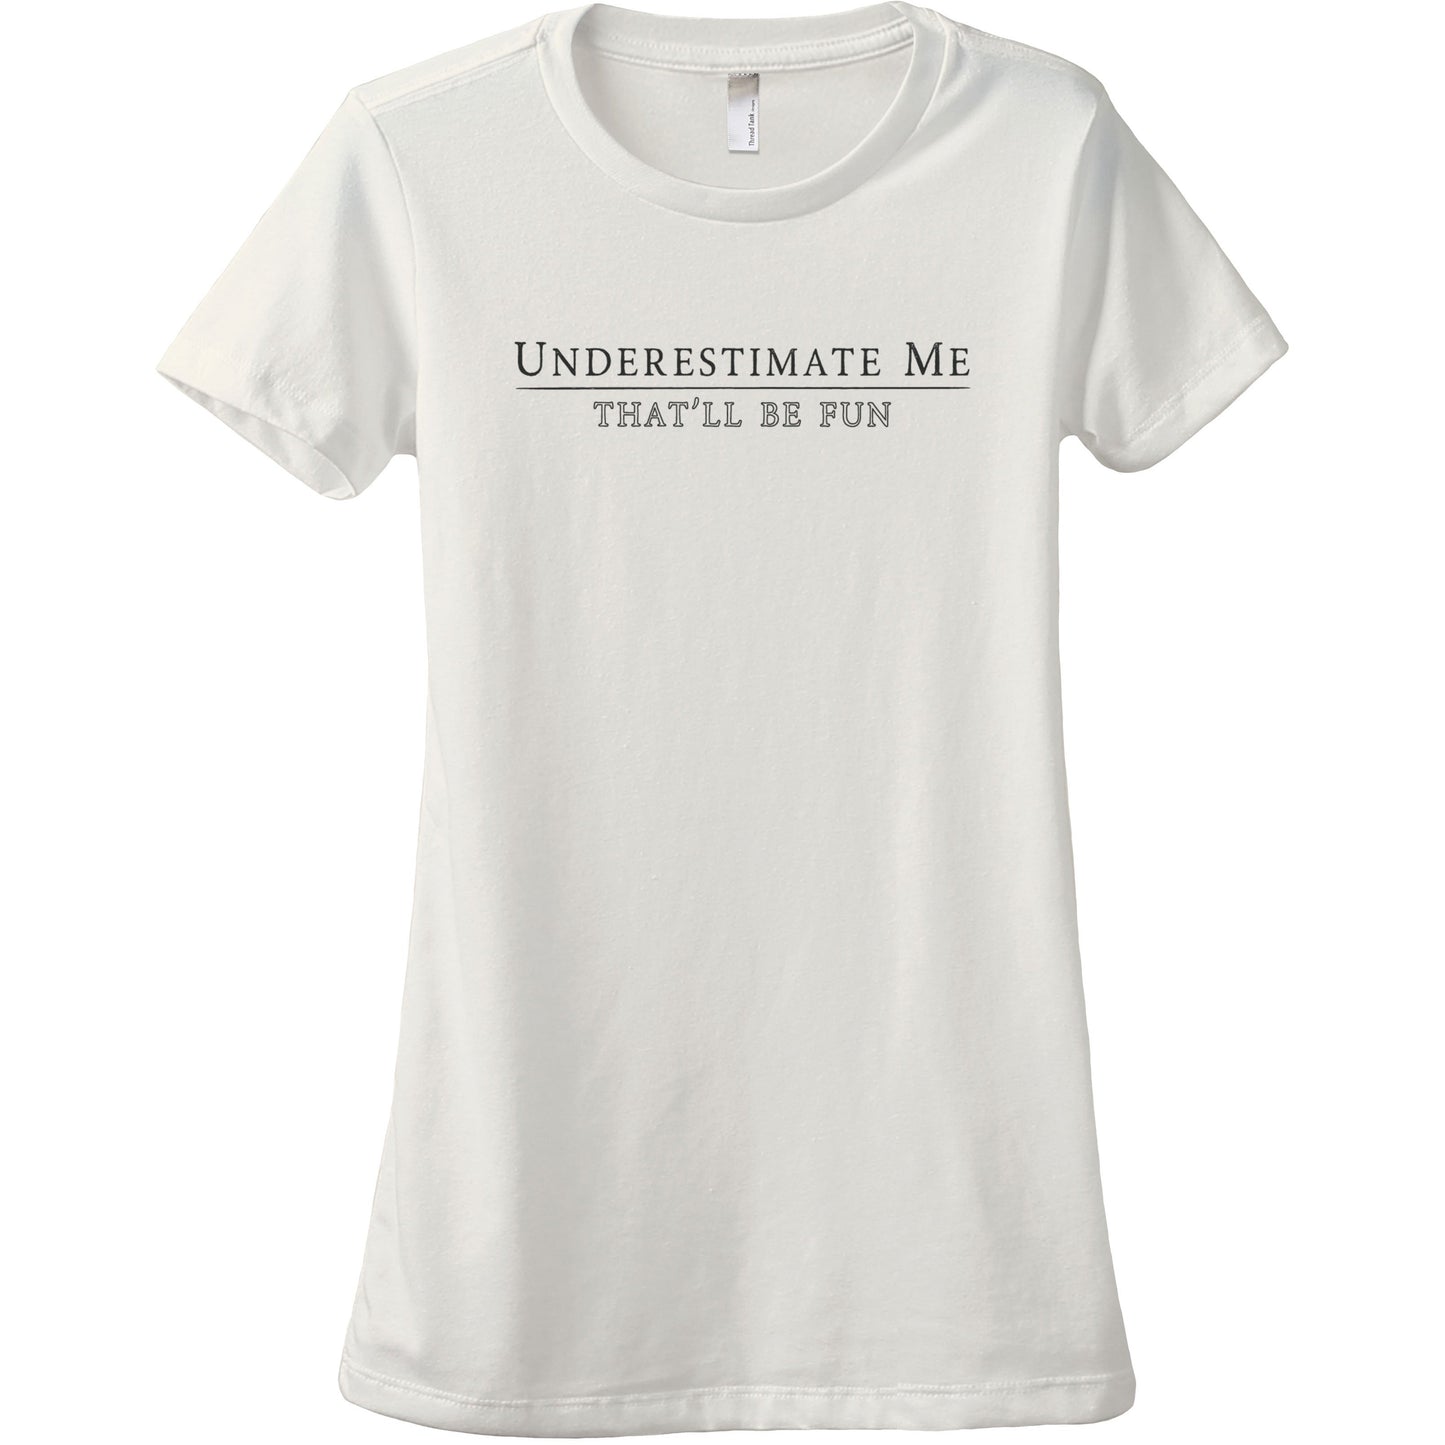 8. Underestimate Me - That'll Be Fun - Stories You Can Wear by Thread Tank